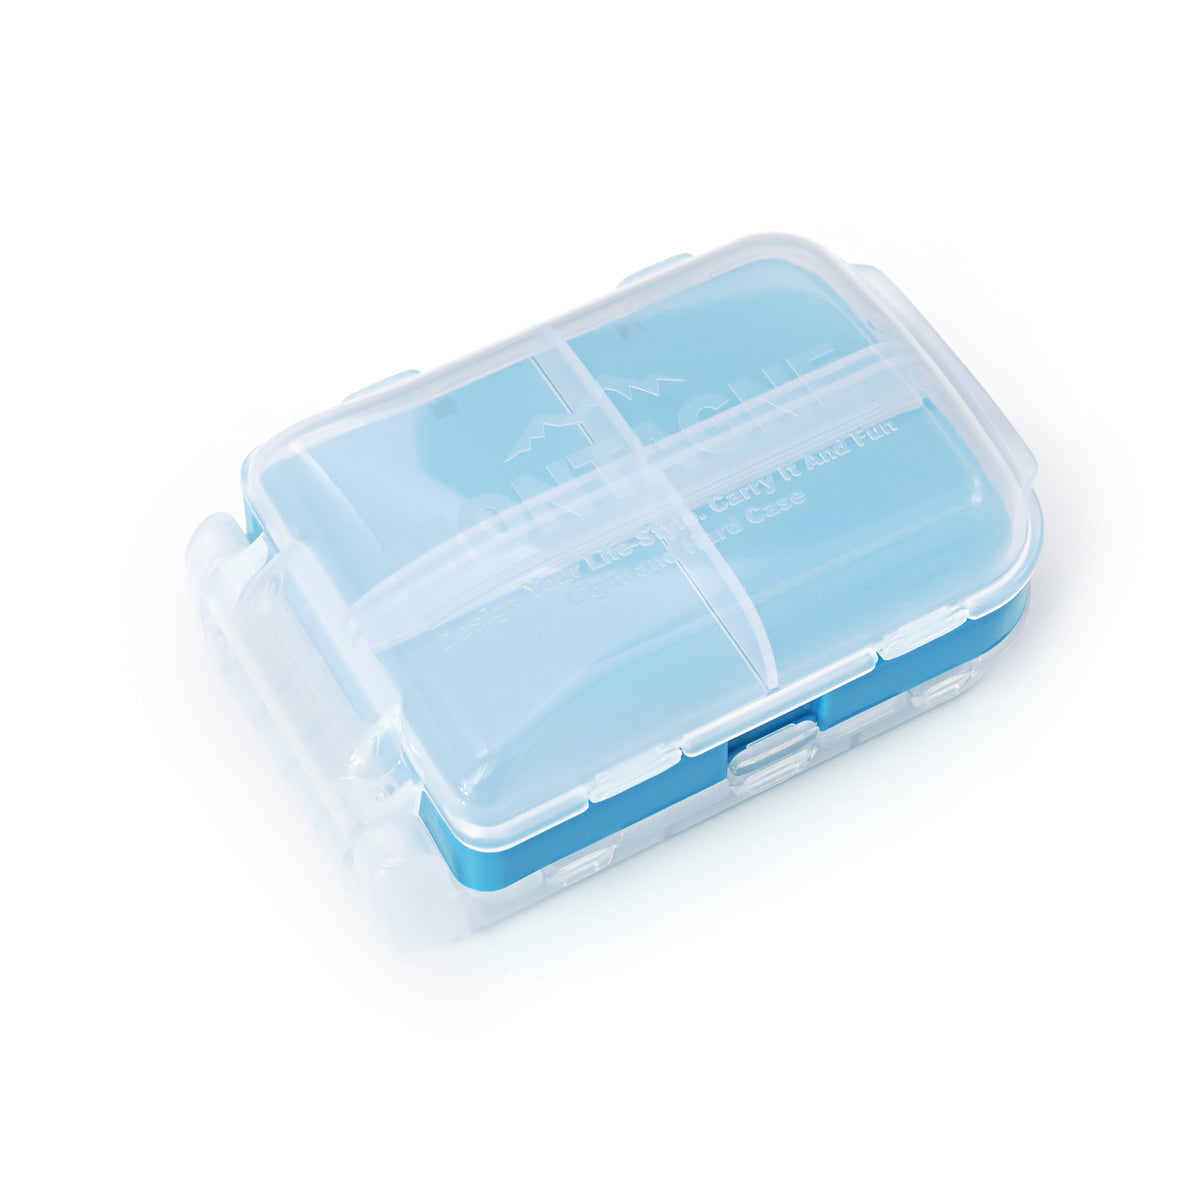 8 Slots Container for Watch Band Spring Bars, Buckles and Watch Parts, Blue